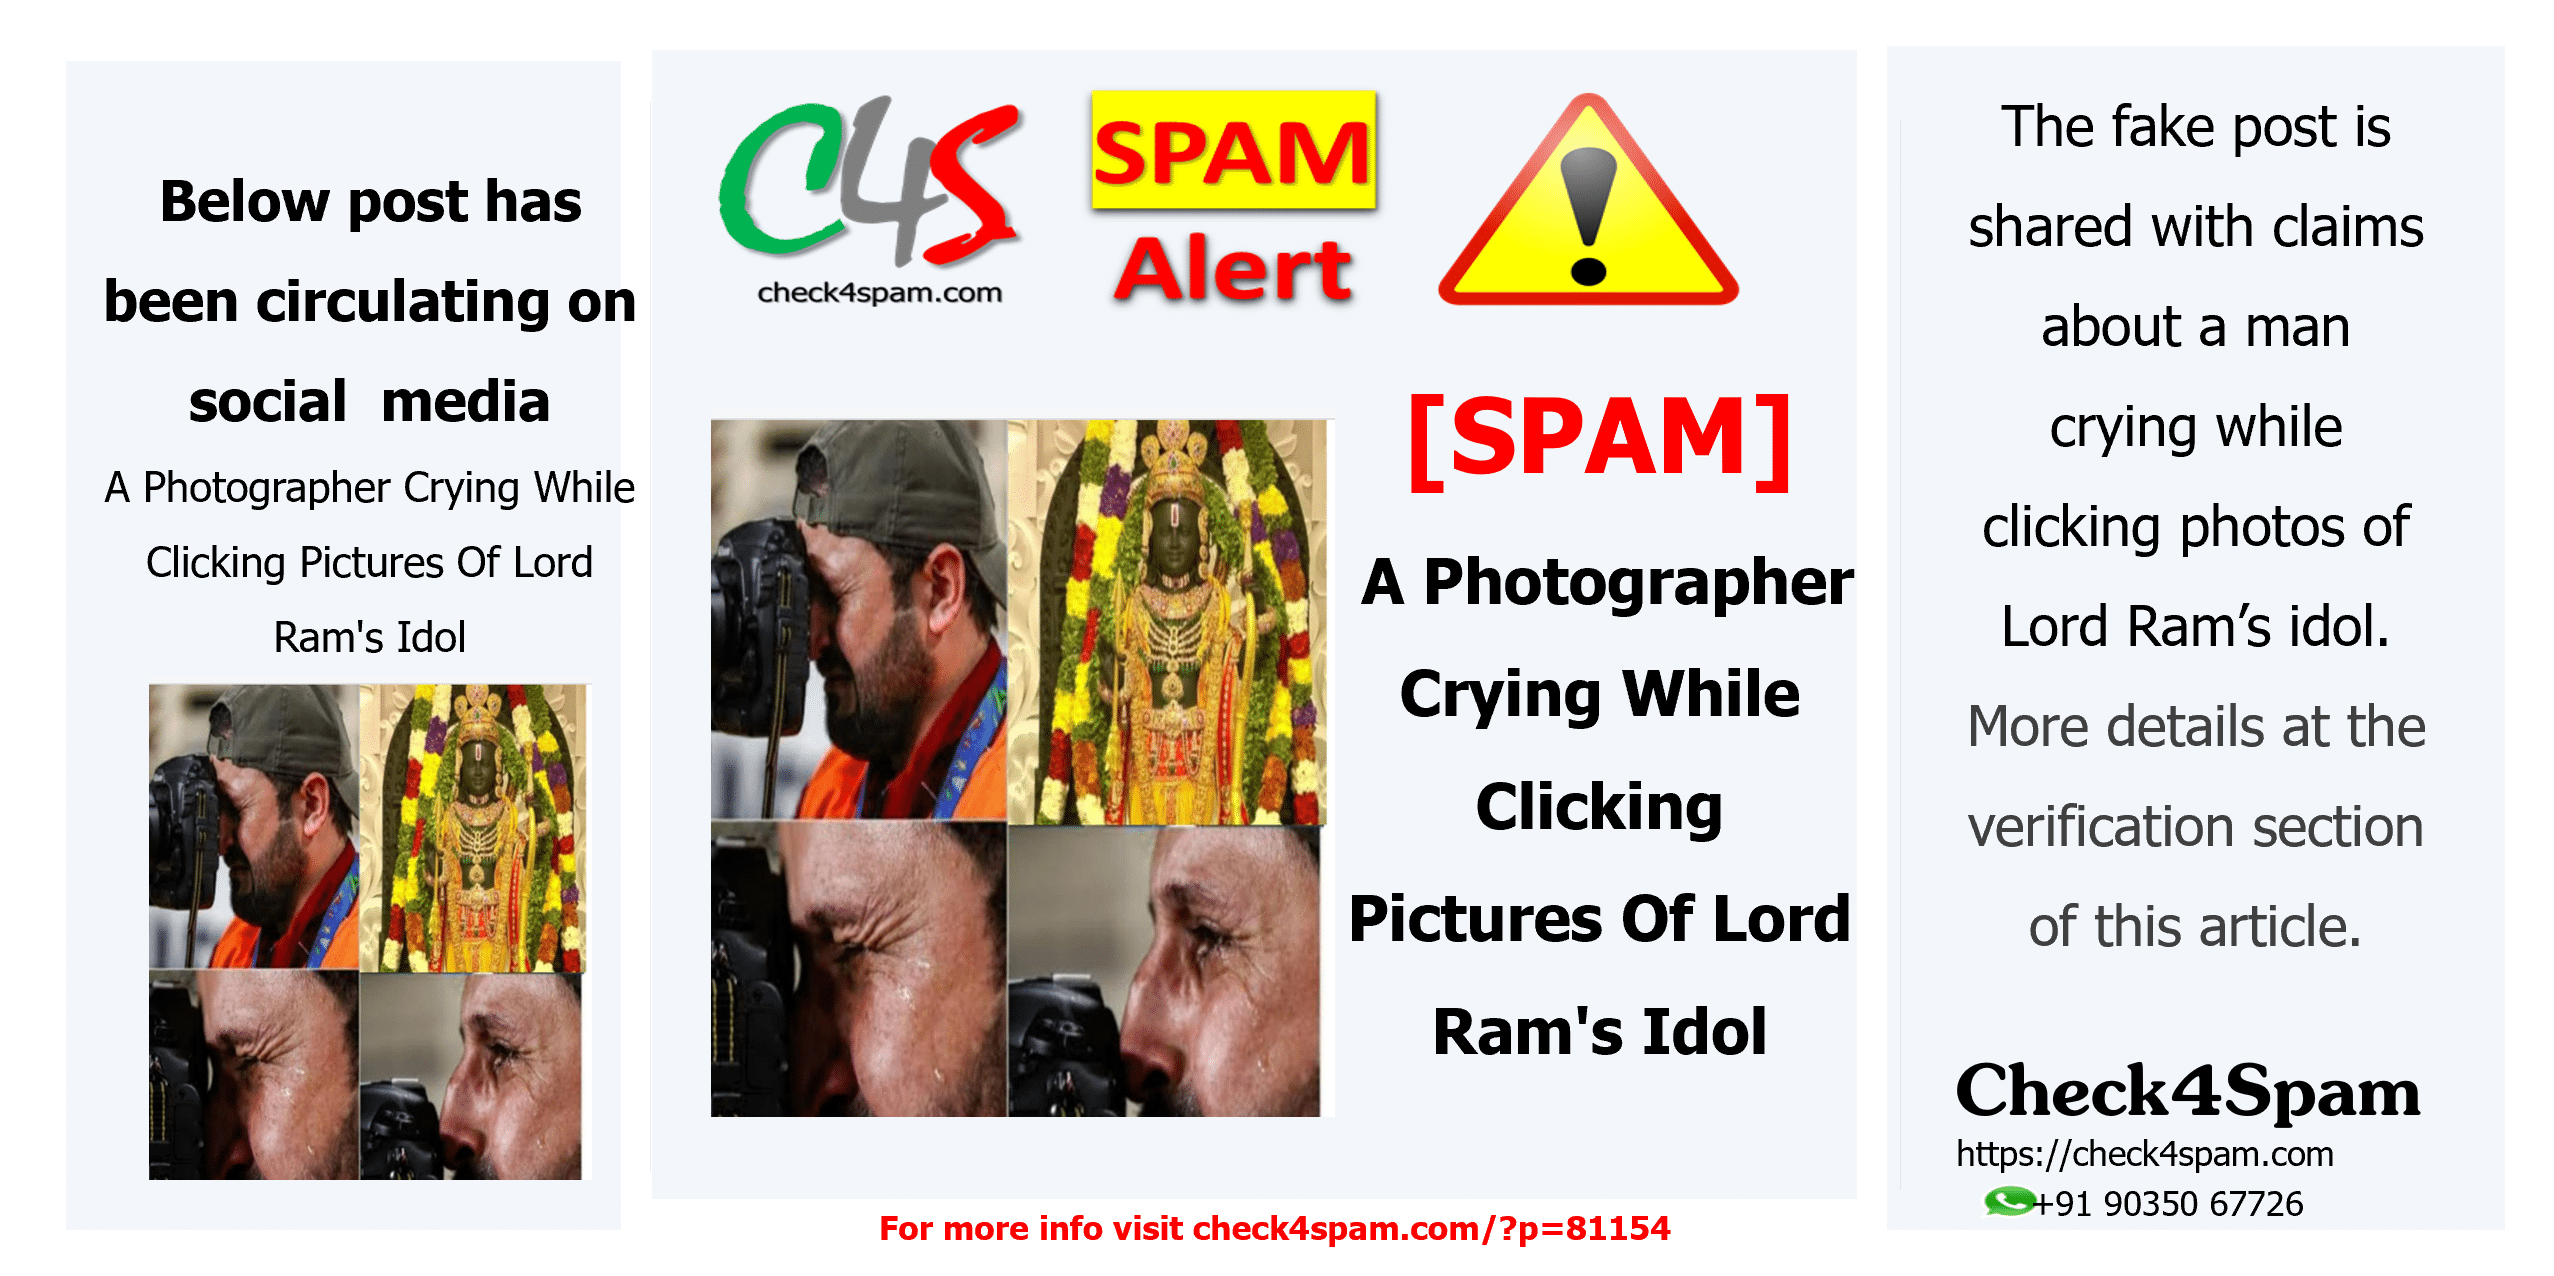 A Photographer Crying While Clicking Pictures Of Lord Ram's Idol